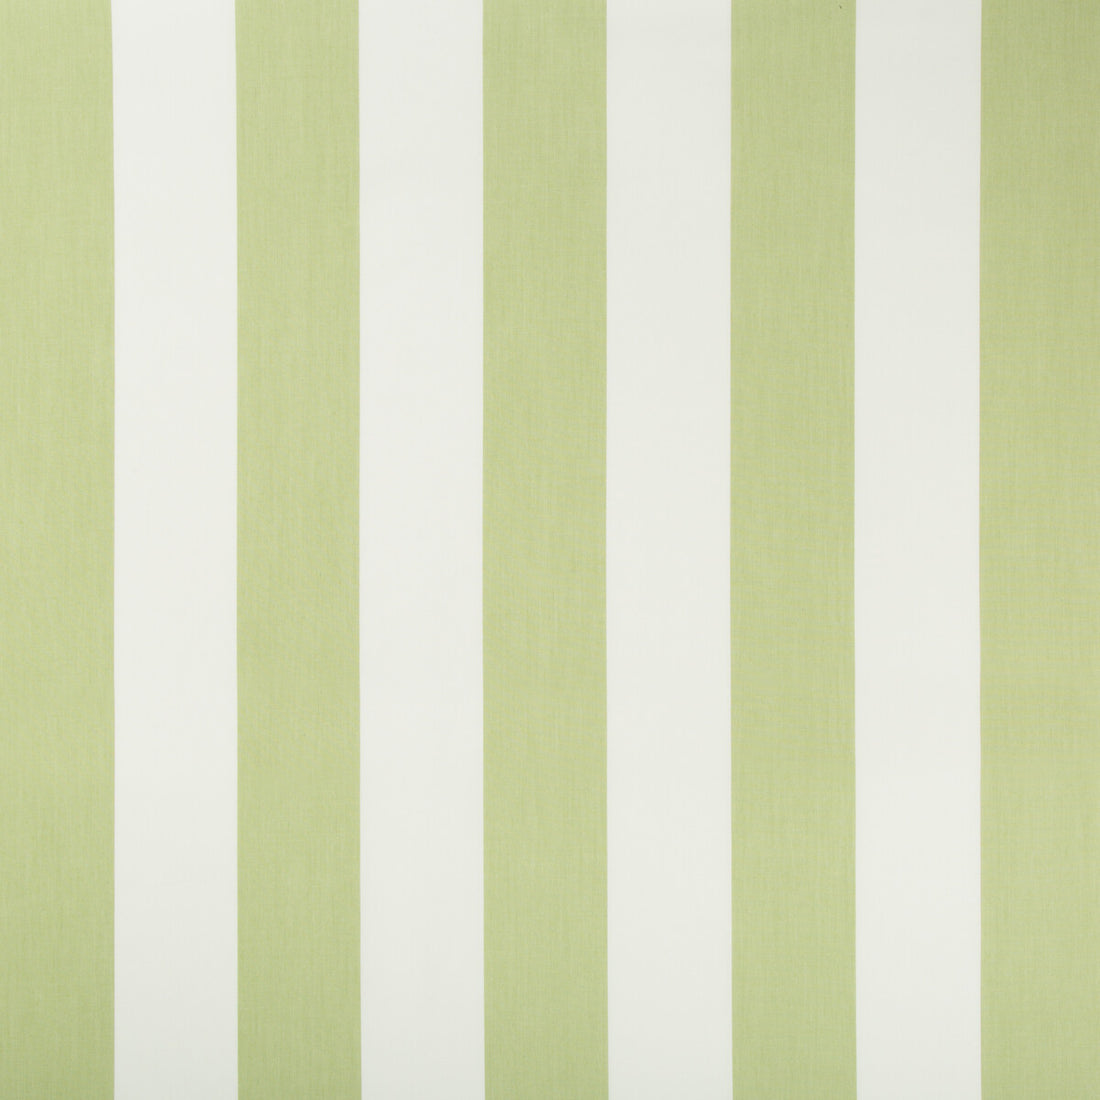 Kravet Basics fabric in 35373-3 color - pattern 35373.3.0 - by Kravet Basics in the Performance Indoor Outdoor collection